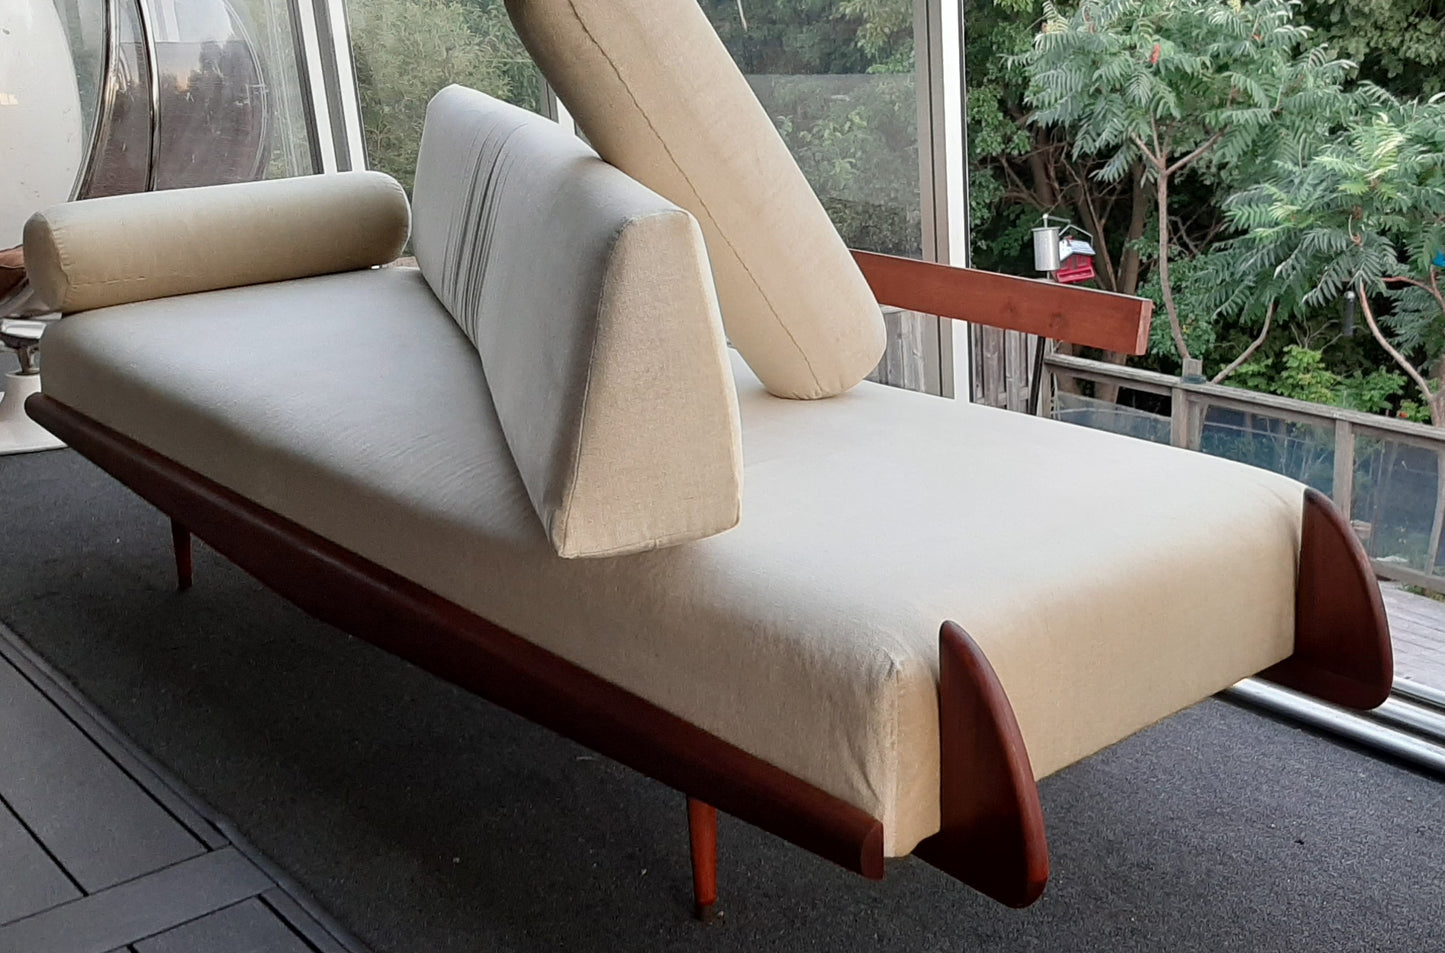 REFINISHED MCM Walnut Sofa / Daybed by Adrian Pearsall 100"